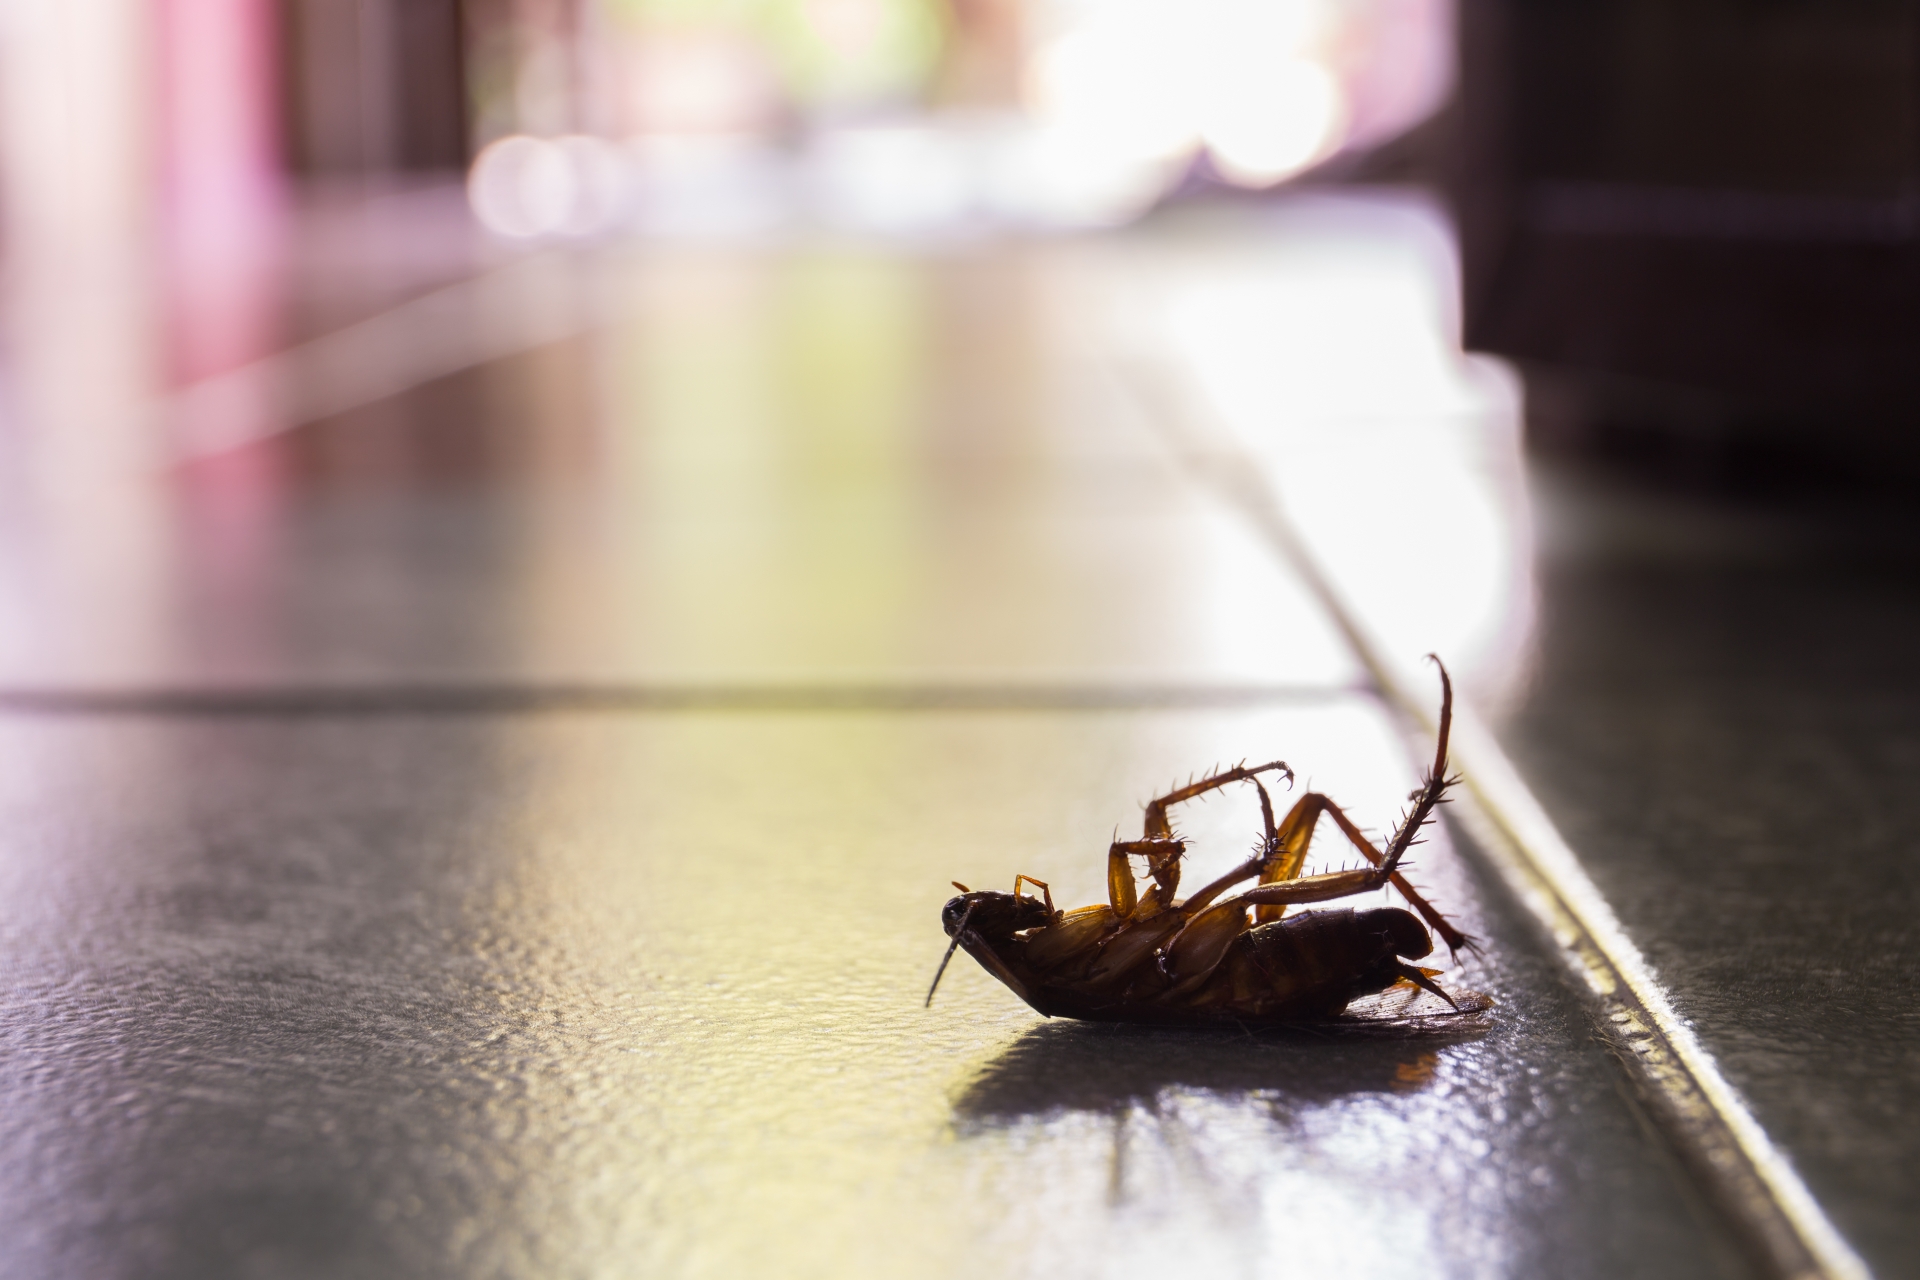 Cockroach Control, Pest Control in Kew, North Sheen, TW9. Call Now 020 8166 9746